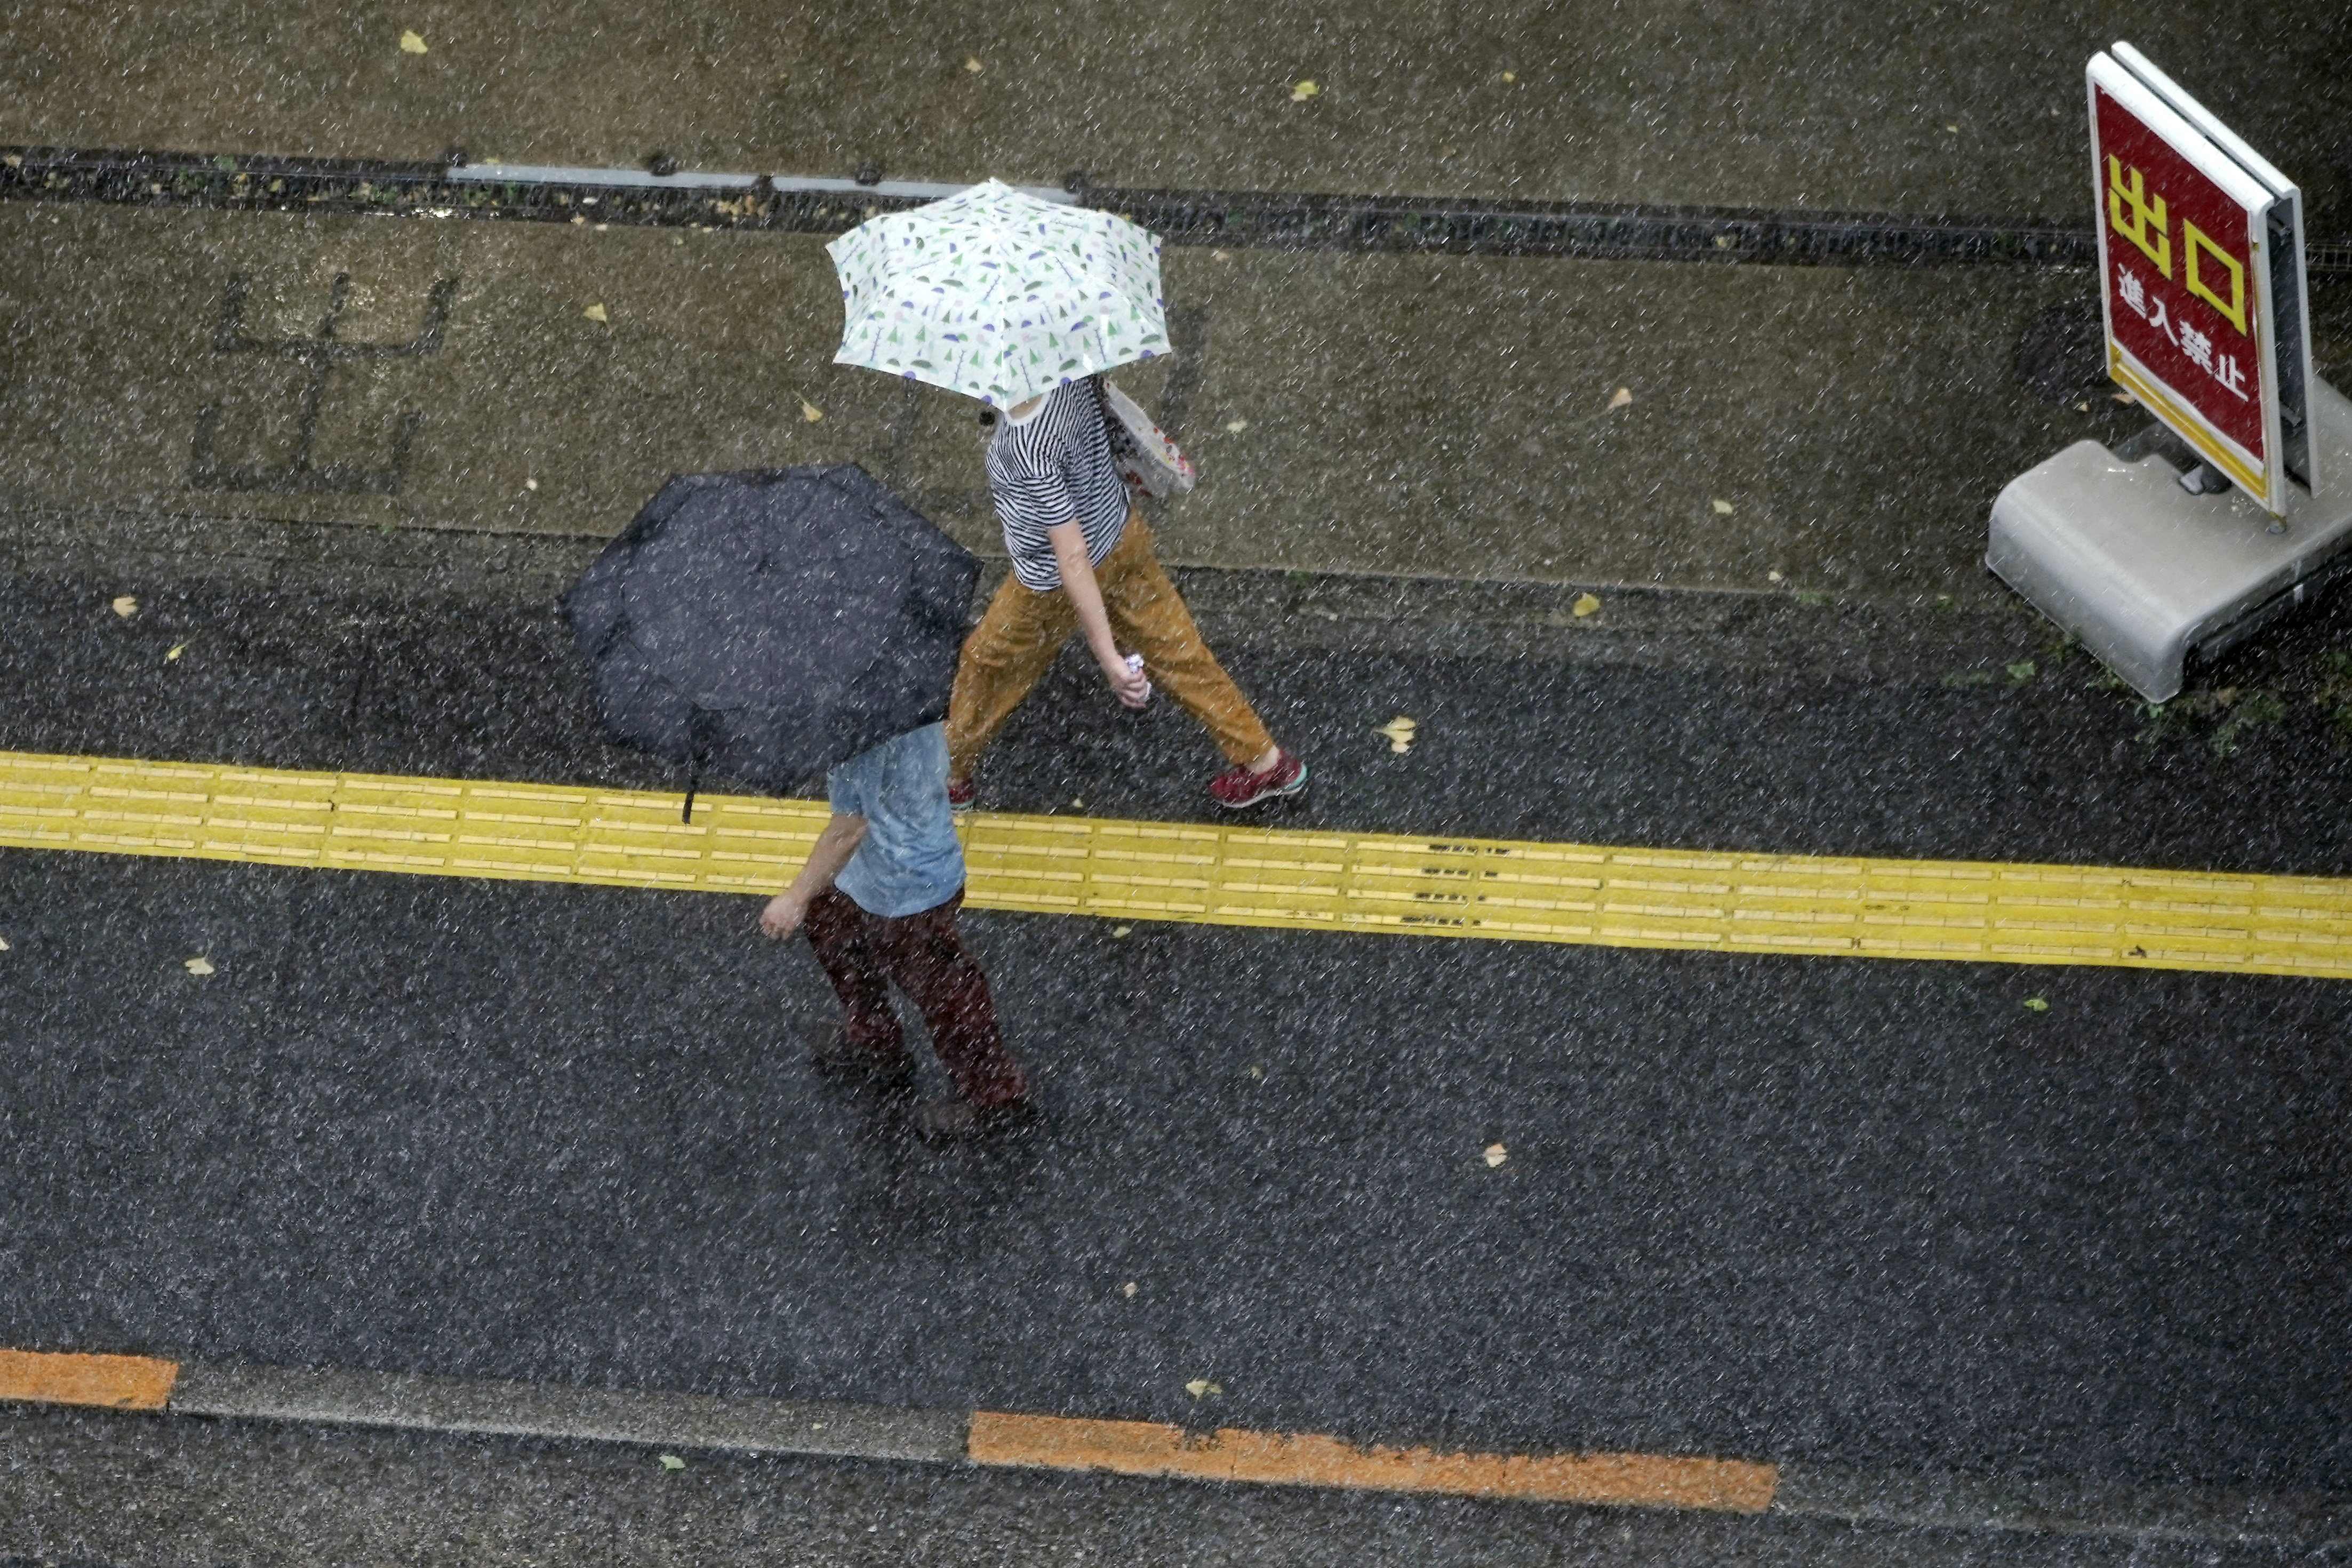 People walk in the heavy rain Monday, Sept. 7, 2020, in Tokyo. A powerful typhoon left people injured, damaged buildings, caused blackouts at nearly half a million homes and paralyzed traffic in southern Japanese islands before headed to South Korea. (AP Photo/Eugene Hoshiko)